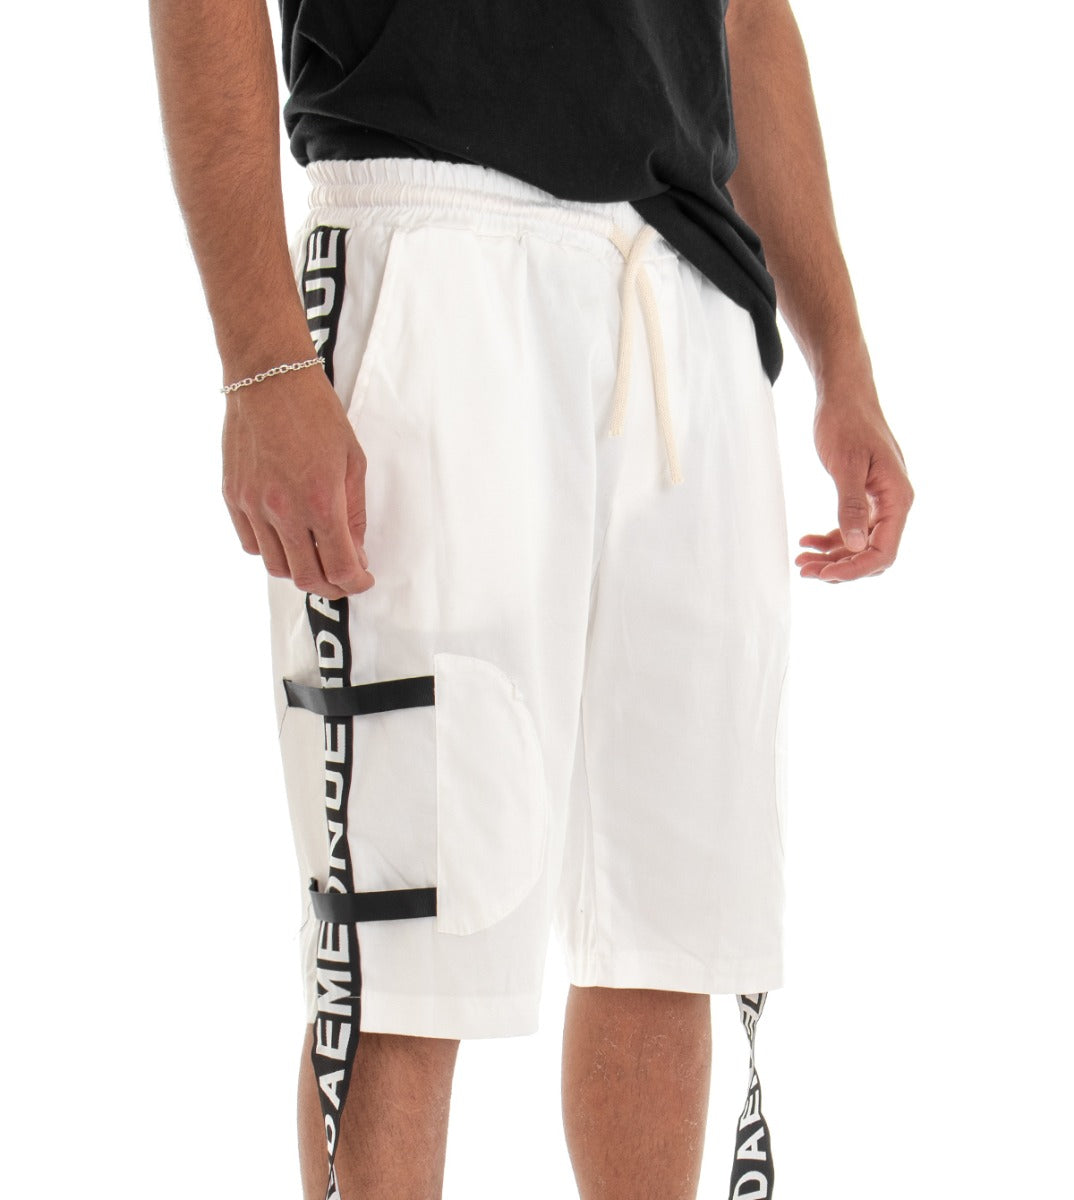 Bermuda Men's Shorts Tracksuit White Side Bands GIOSAL-PC1552A